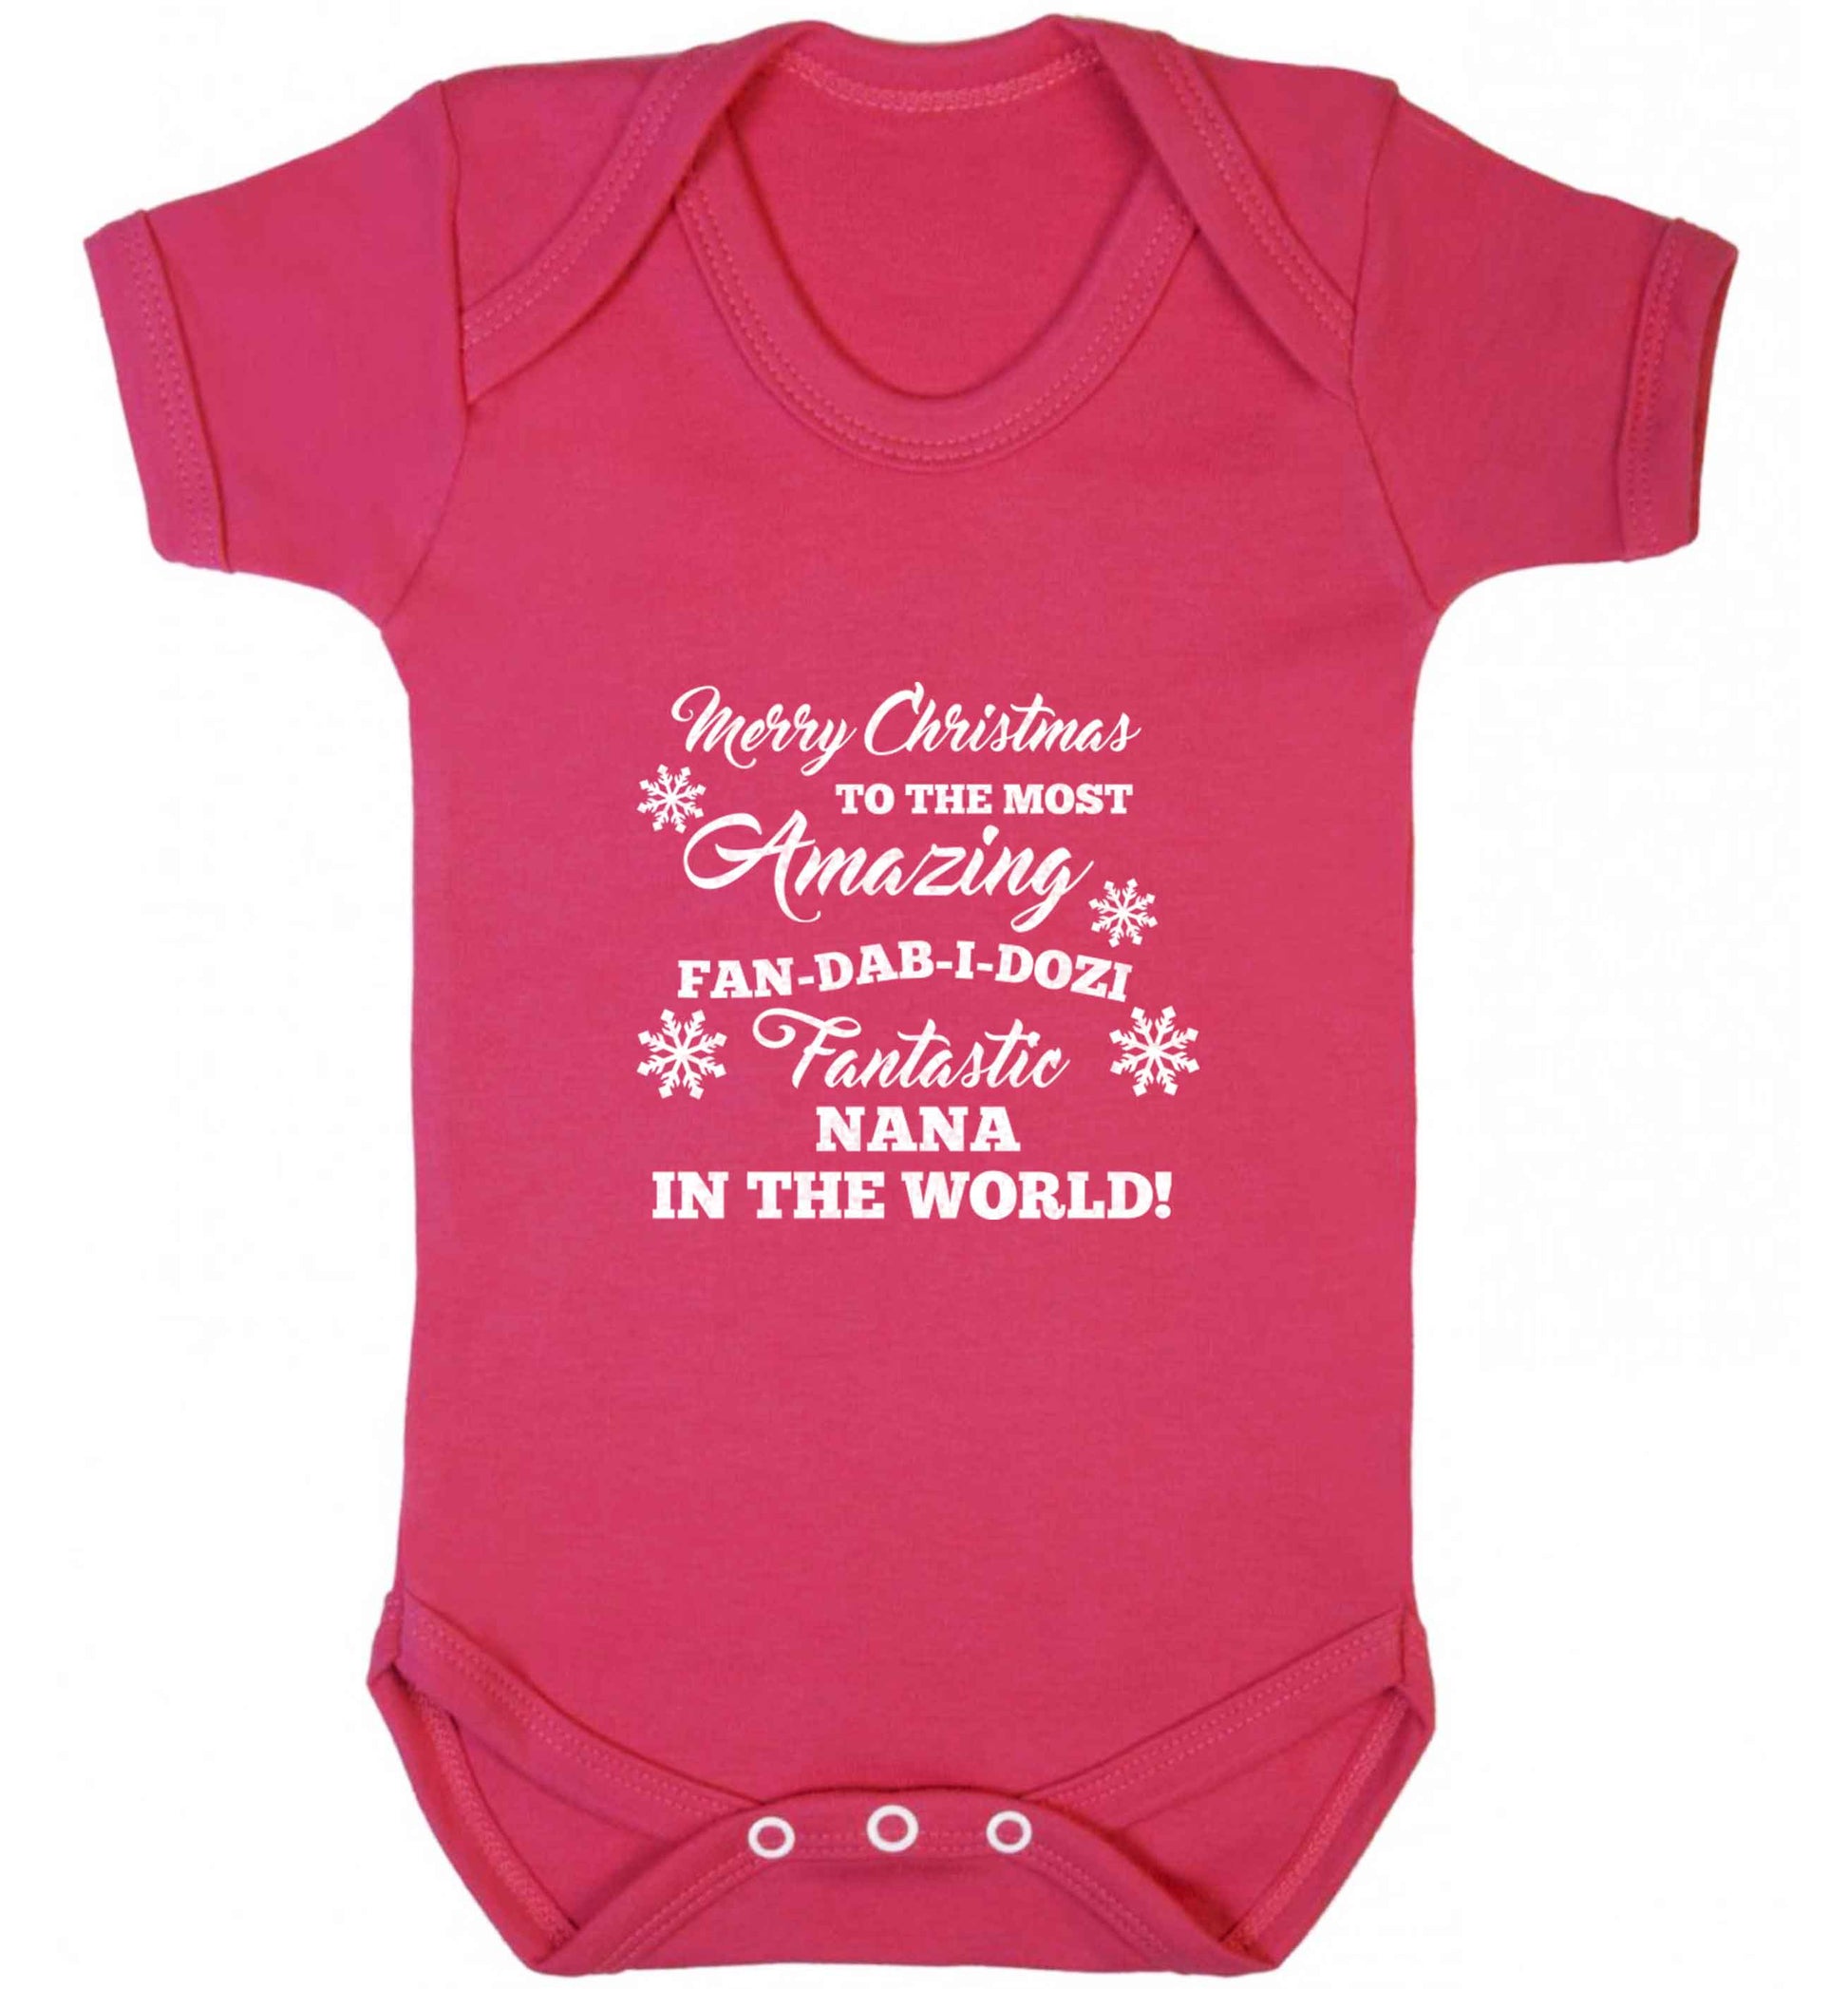 Merry Christmas to the most amazing fan-dab-i-dozi fantasic Nana in the world baby vest dark pink 18-24 months